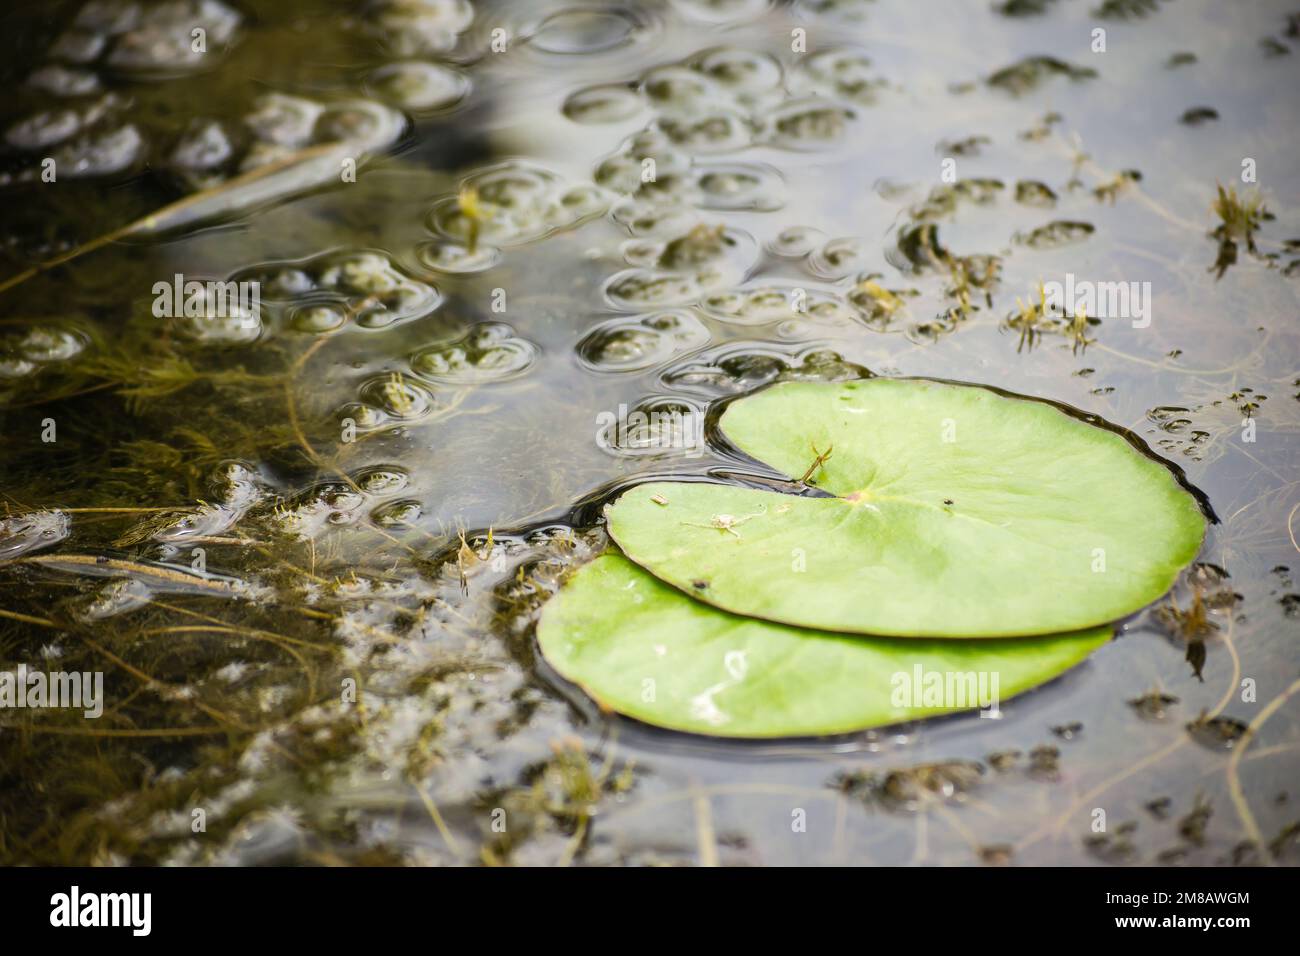 Green lily leaves float in the blue clear water of the pond. Stock Photo